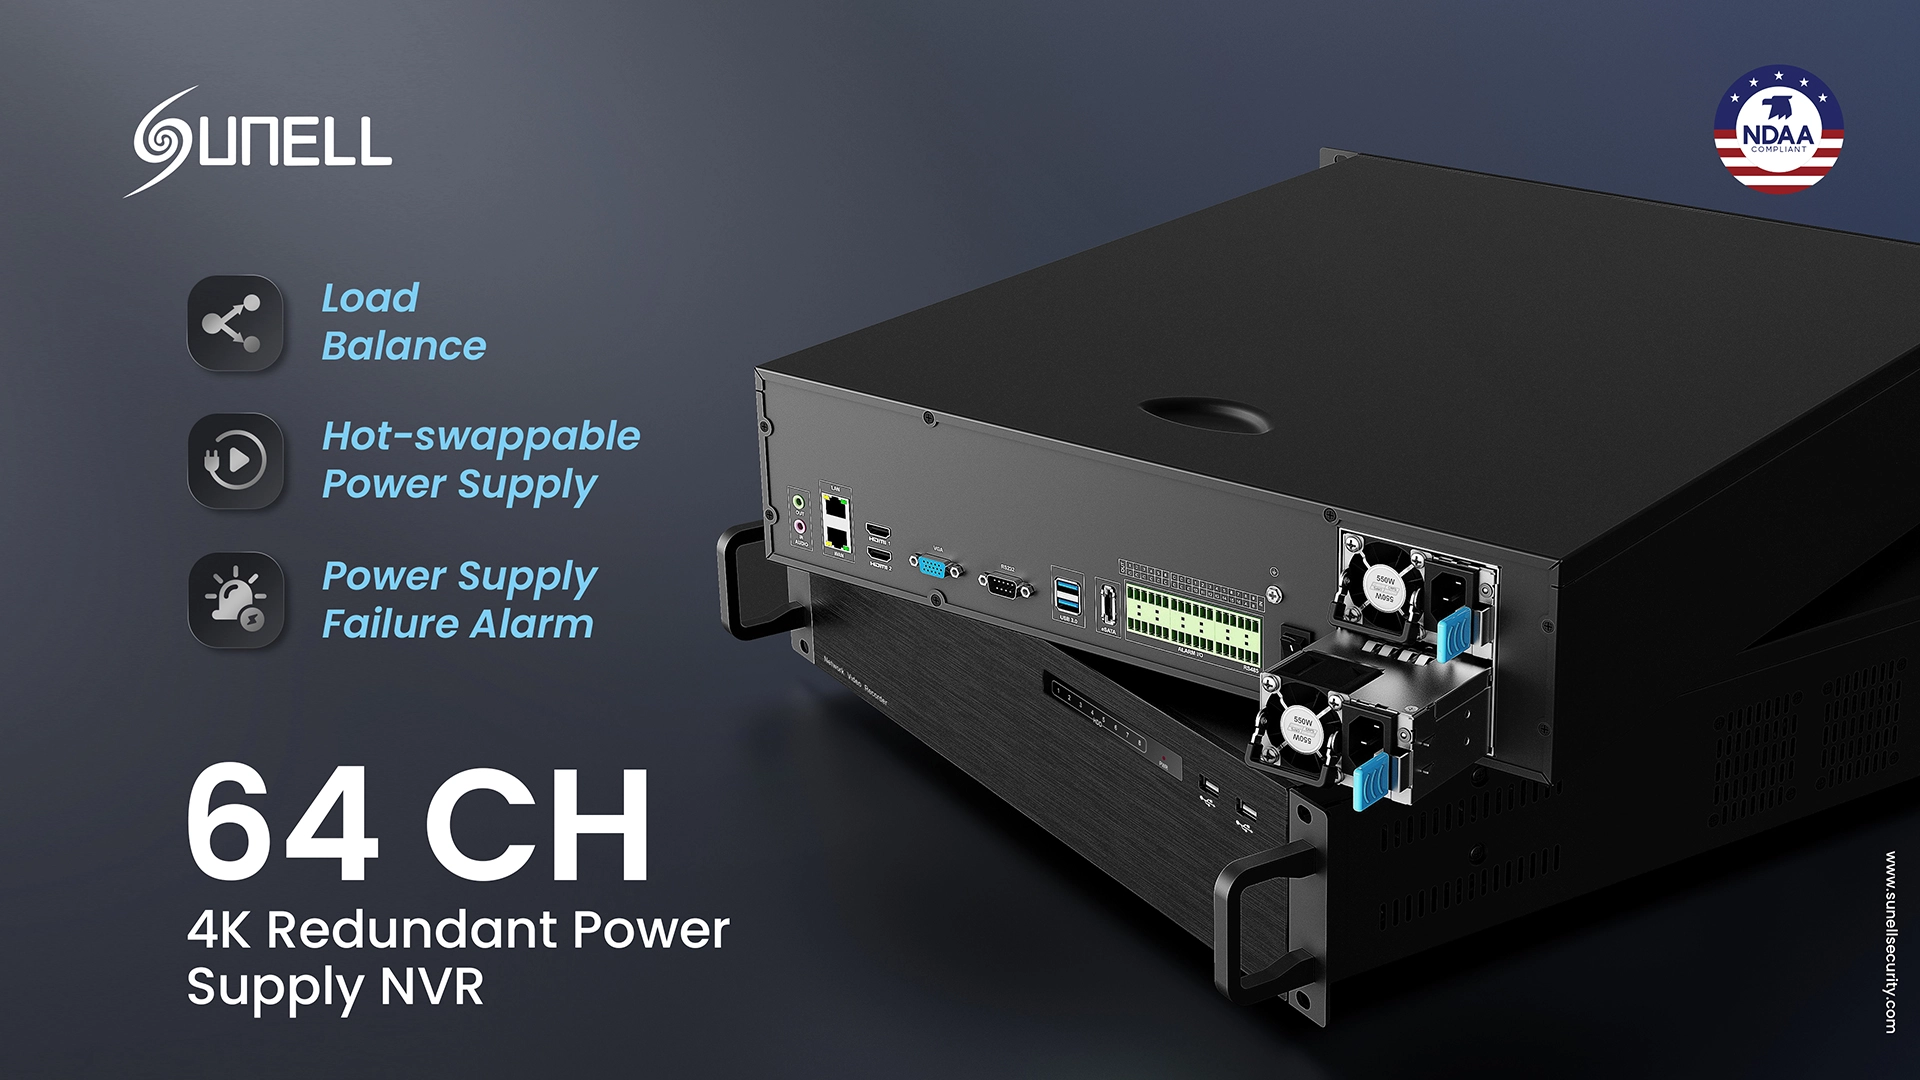 Sunell Launches the New 64-ch 4K Redundant Power NVR to Ensure Stable Surveillance